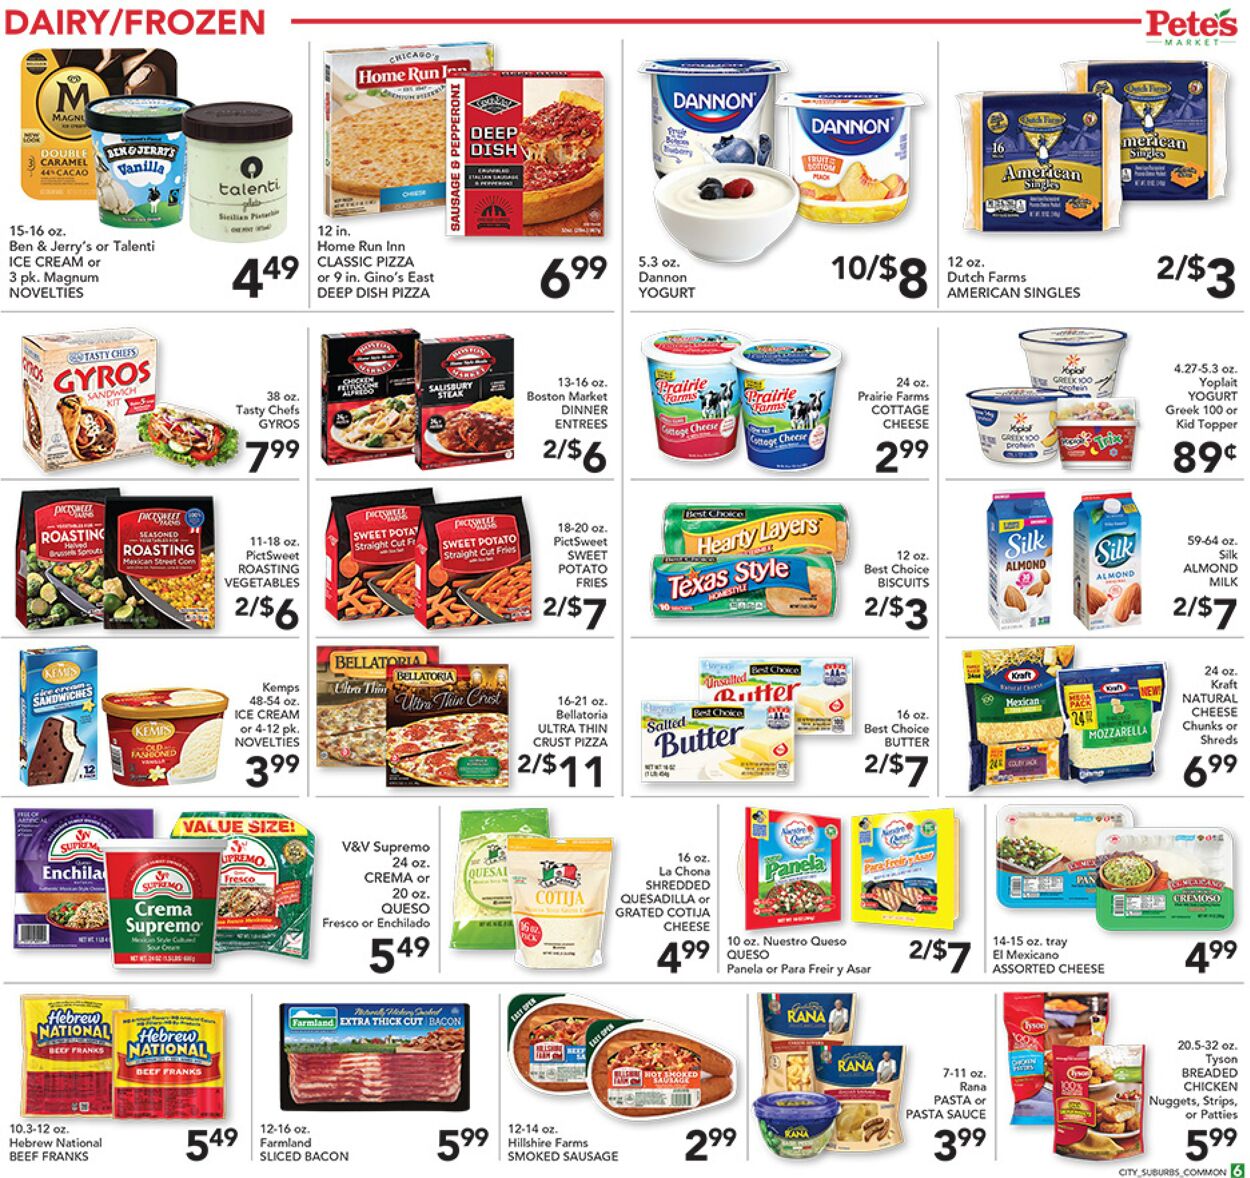 Weekly ad Pete's Fresh Market 01/25/2023 - 01/31/2023